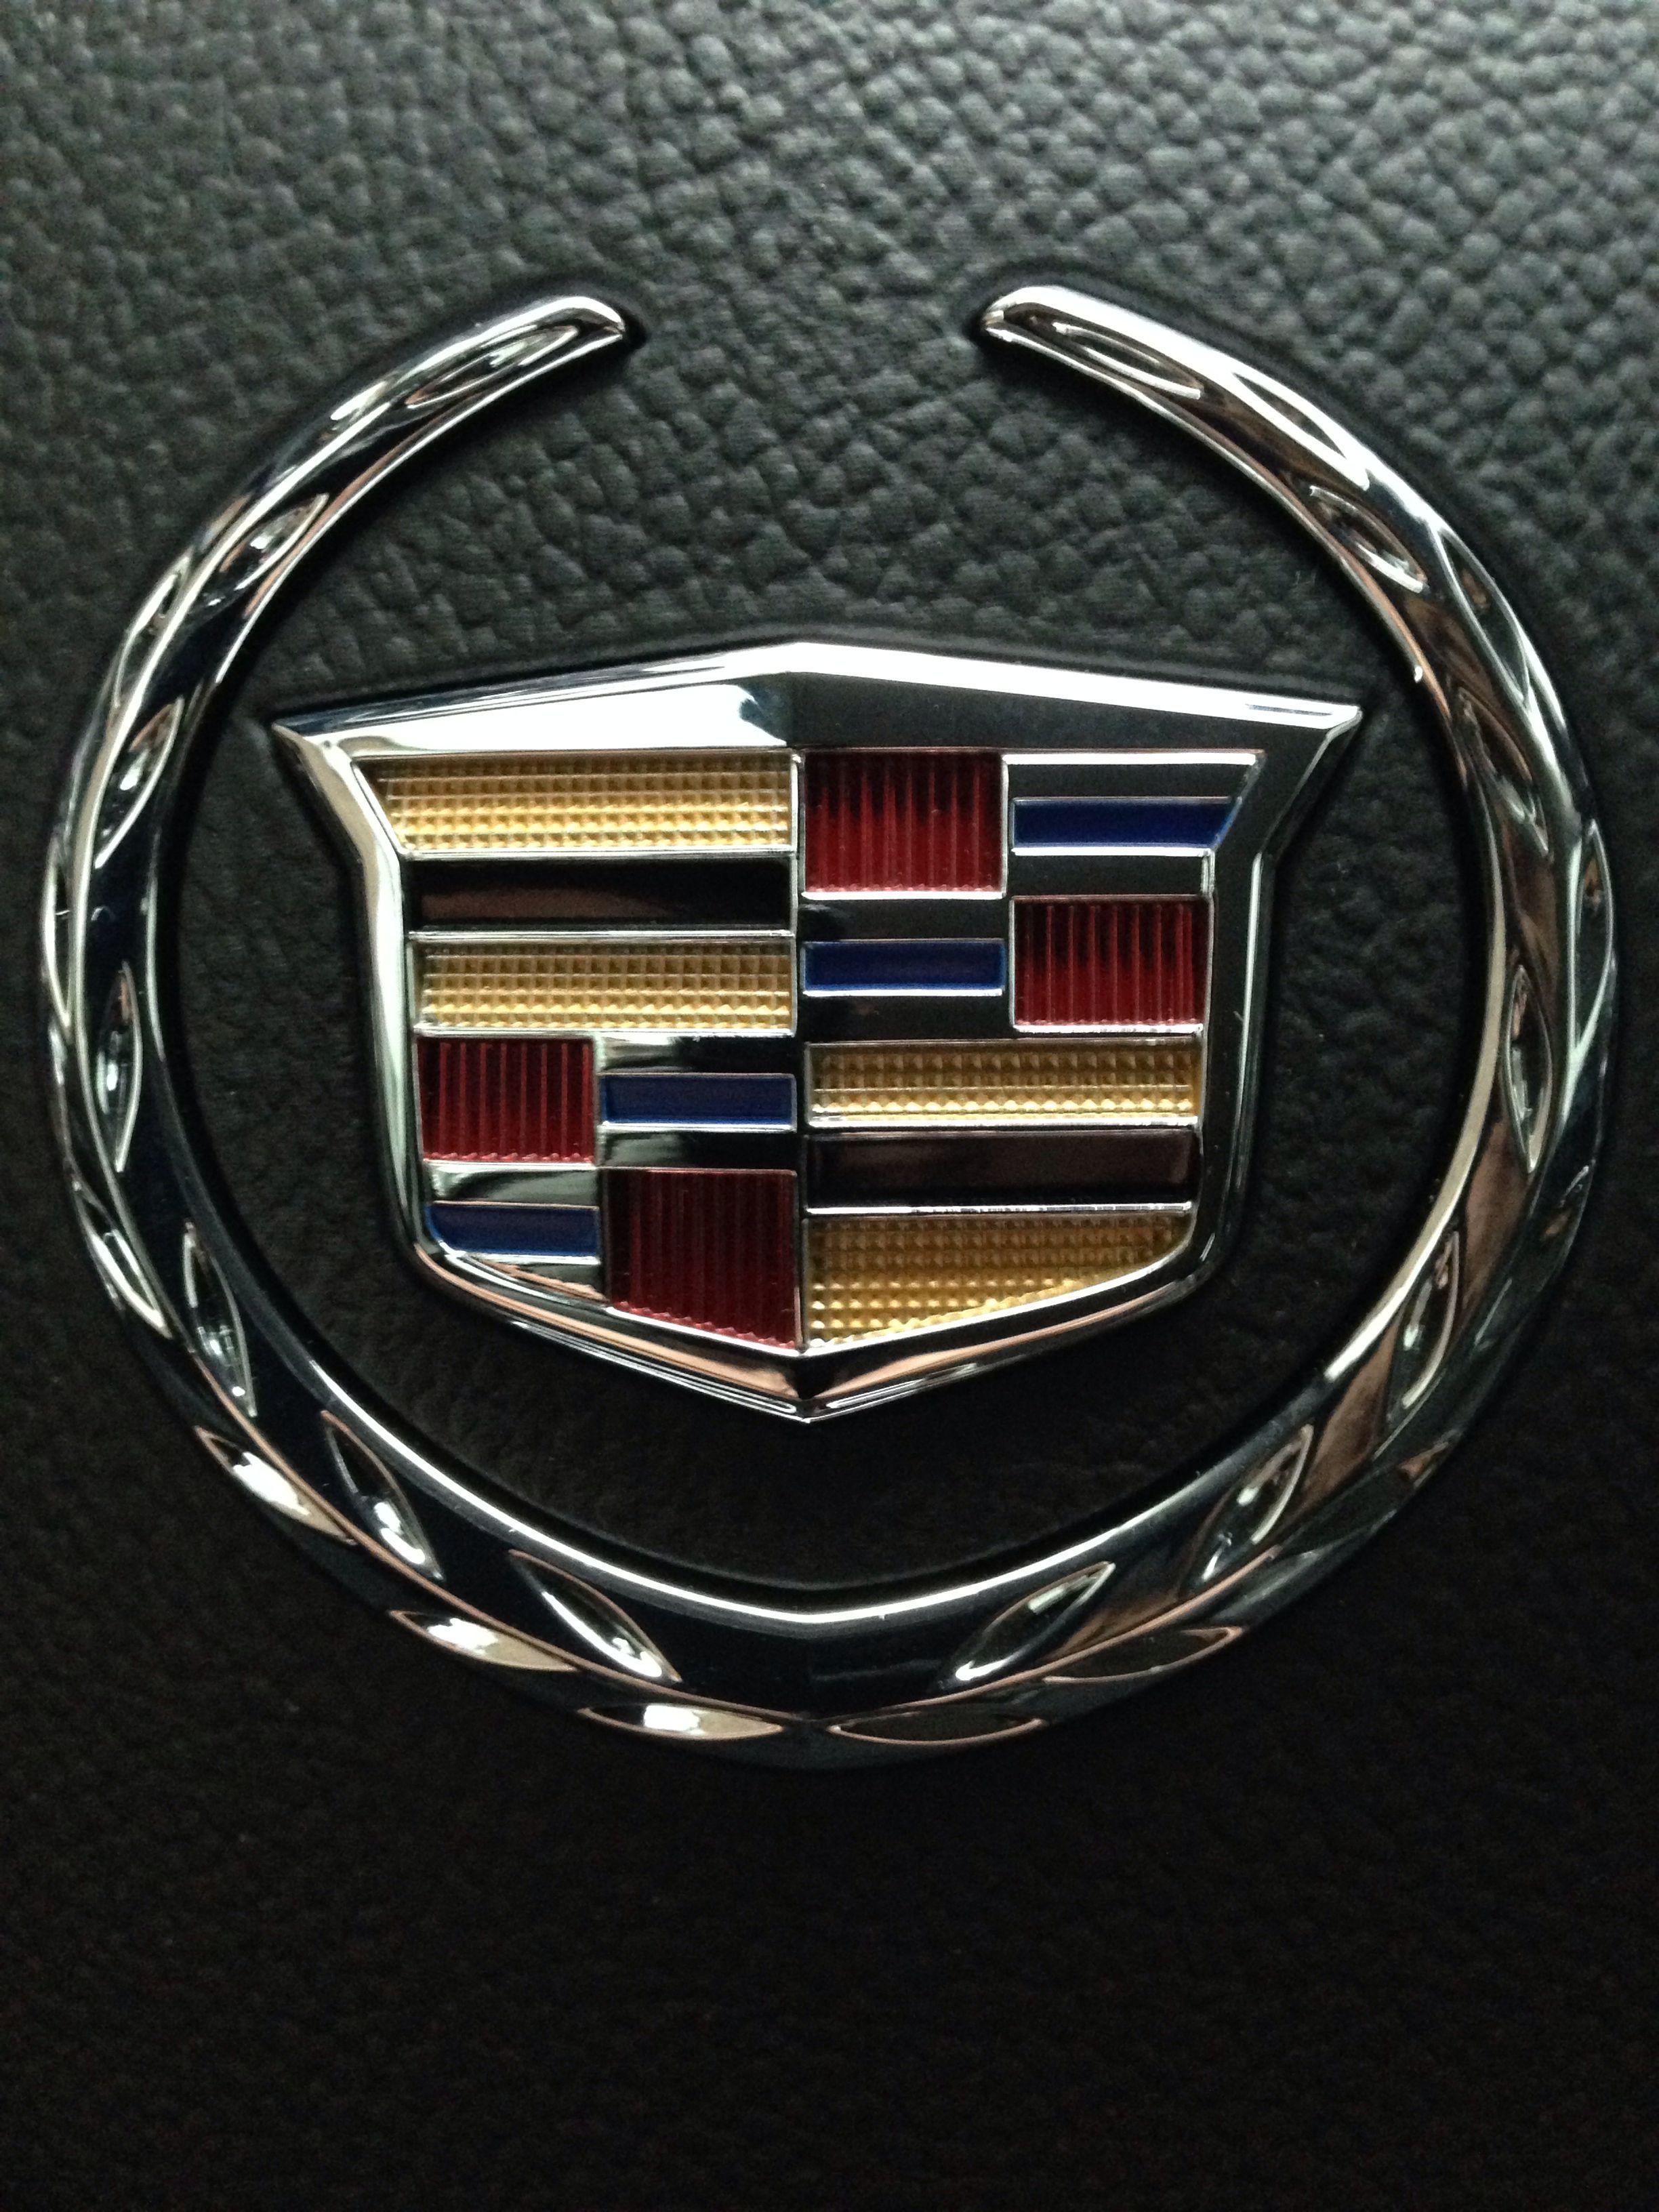 Sexy Cadillac Logo - 2014 Cadillac SRX - growing up I thought these cars were for the ...